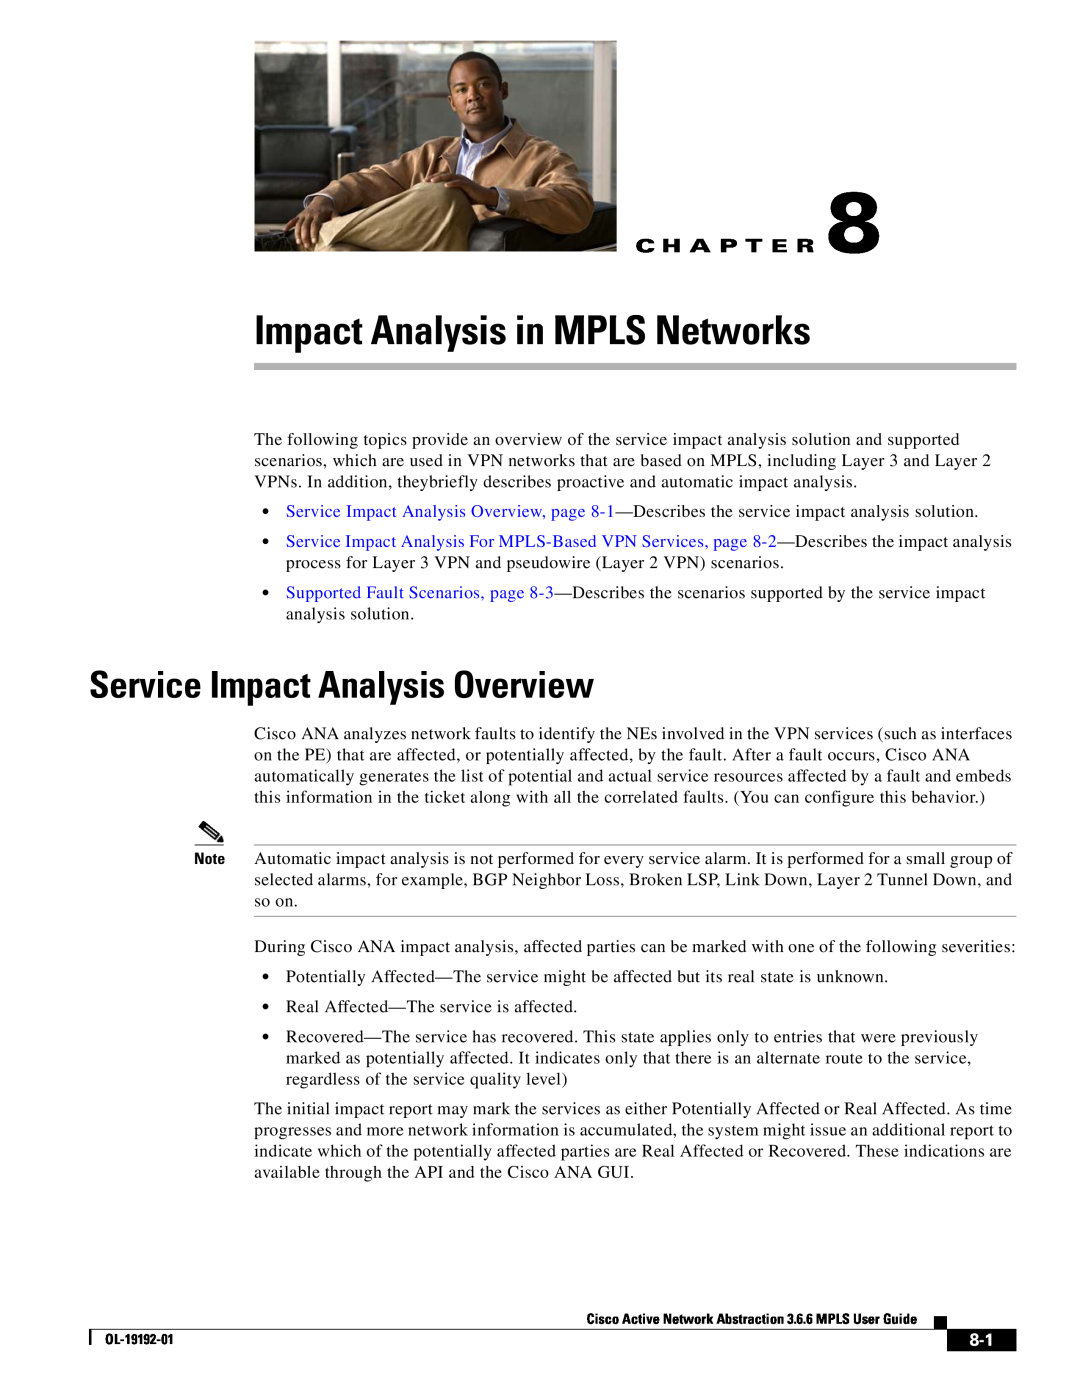 Cisco Systems 3.6.6 manual Impact Analysis in MPLS Networks, Service Impact Analysis Overview, C H A P T E R 